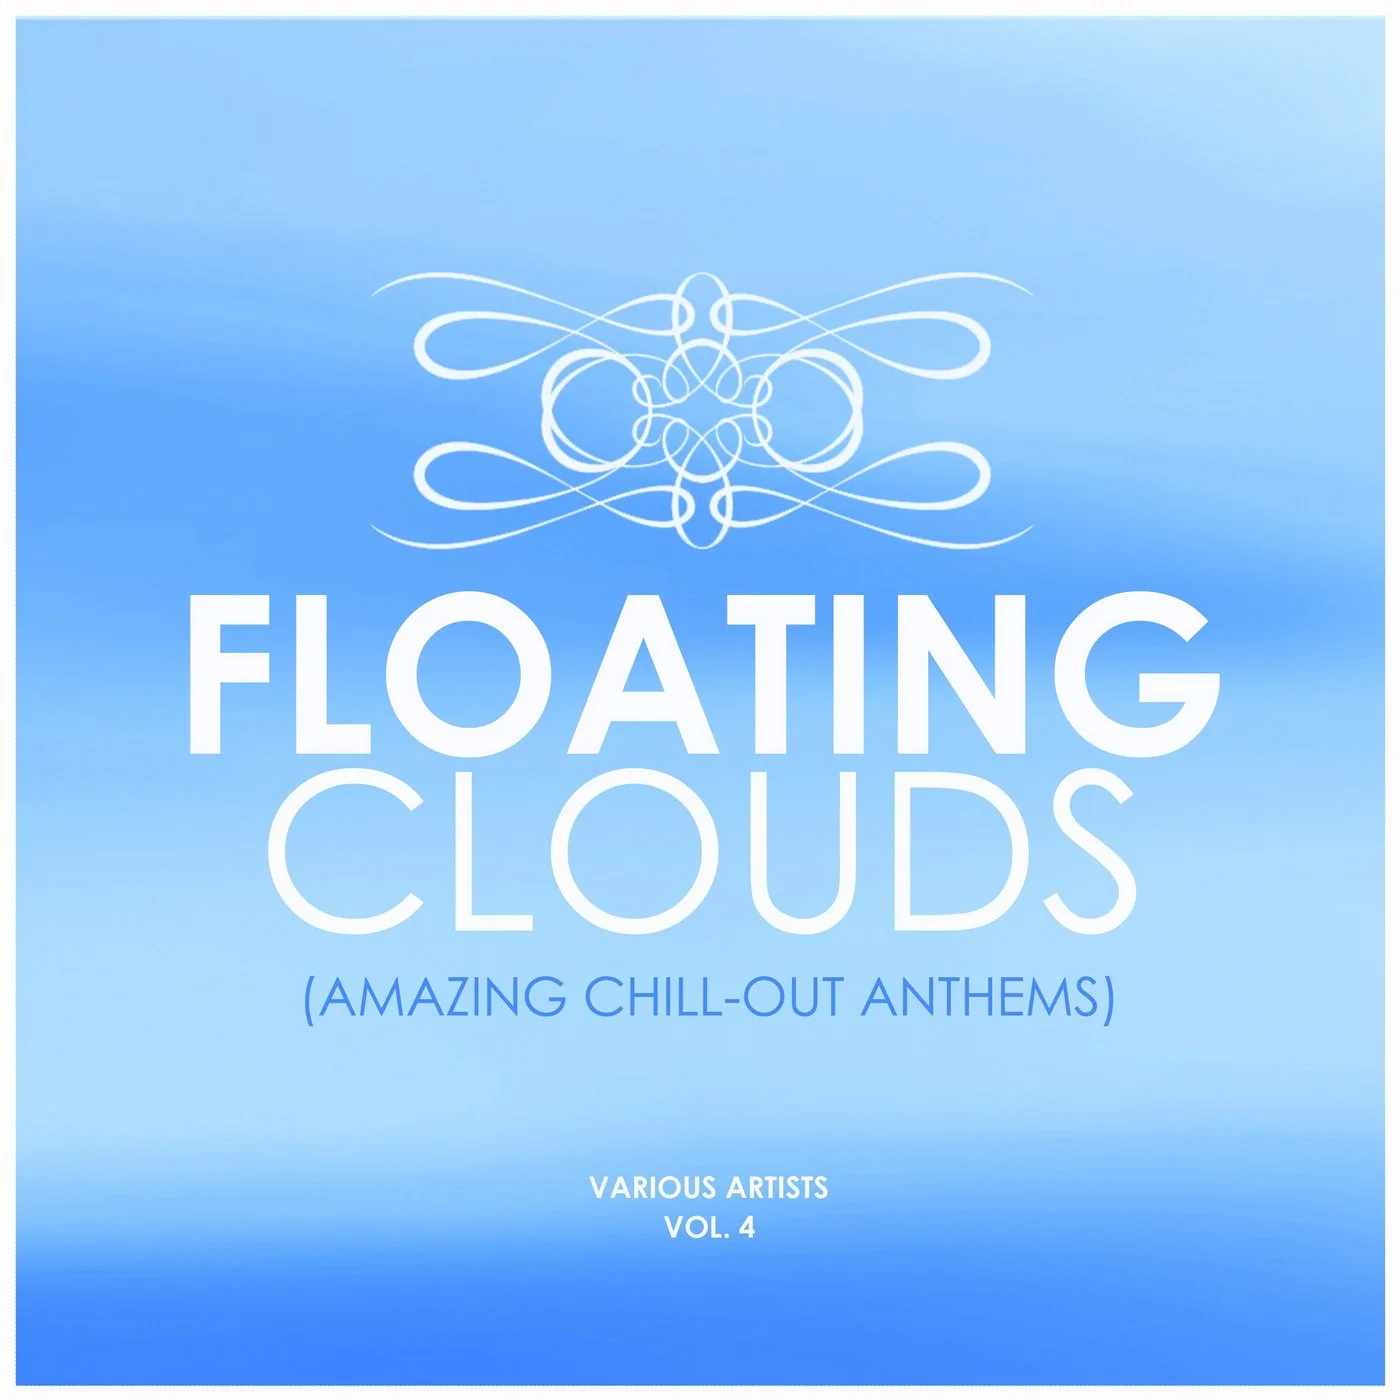 Cover von Compilation "Floating Clouds (Amazing Chill out Anthems), Vol. 4>"